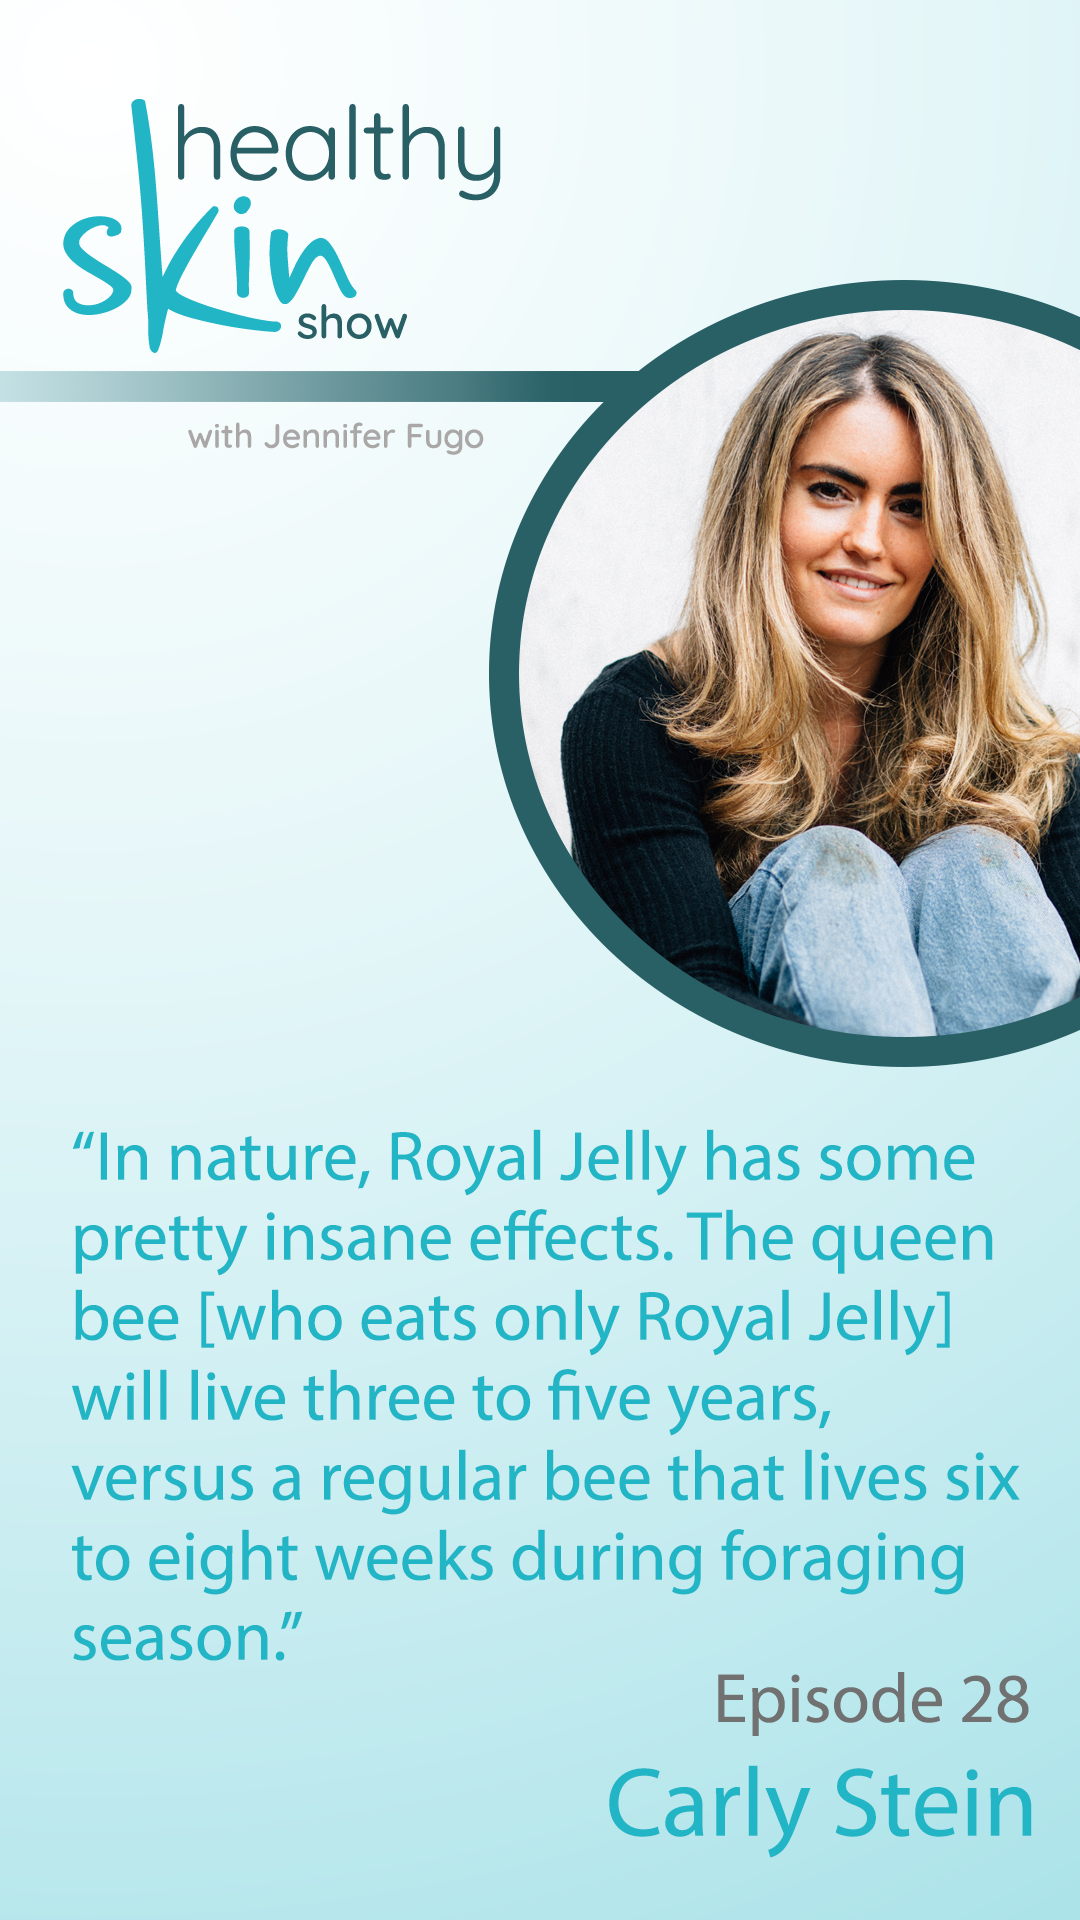 “In nature, Royal Jelly has some pretty insane effects. The queen bee [who eats only Royal Jelly] will live three to five years, versus a regular bee that lives six to eight weeks during foraging season.”